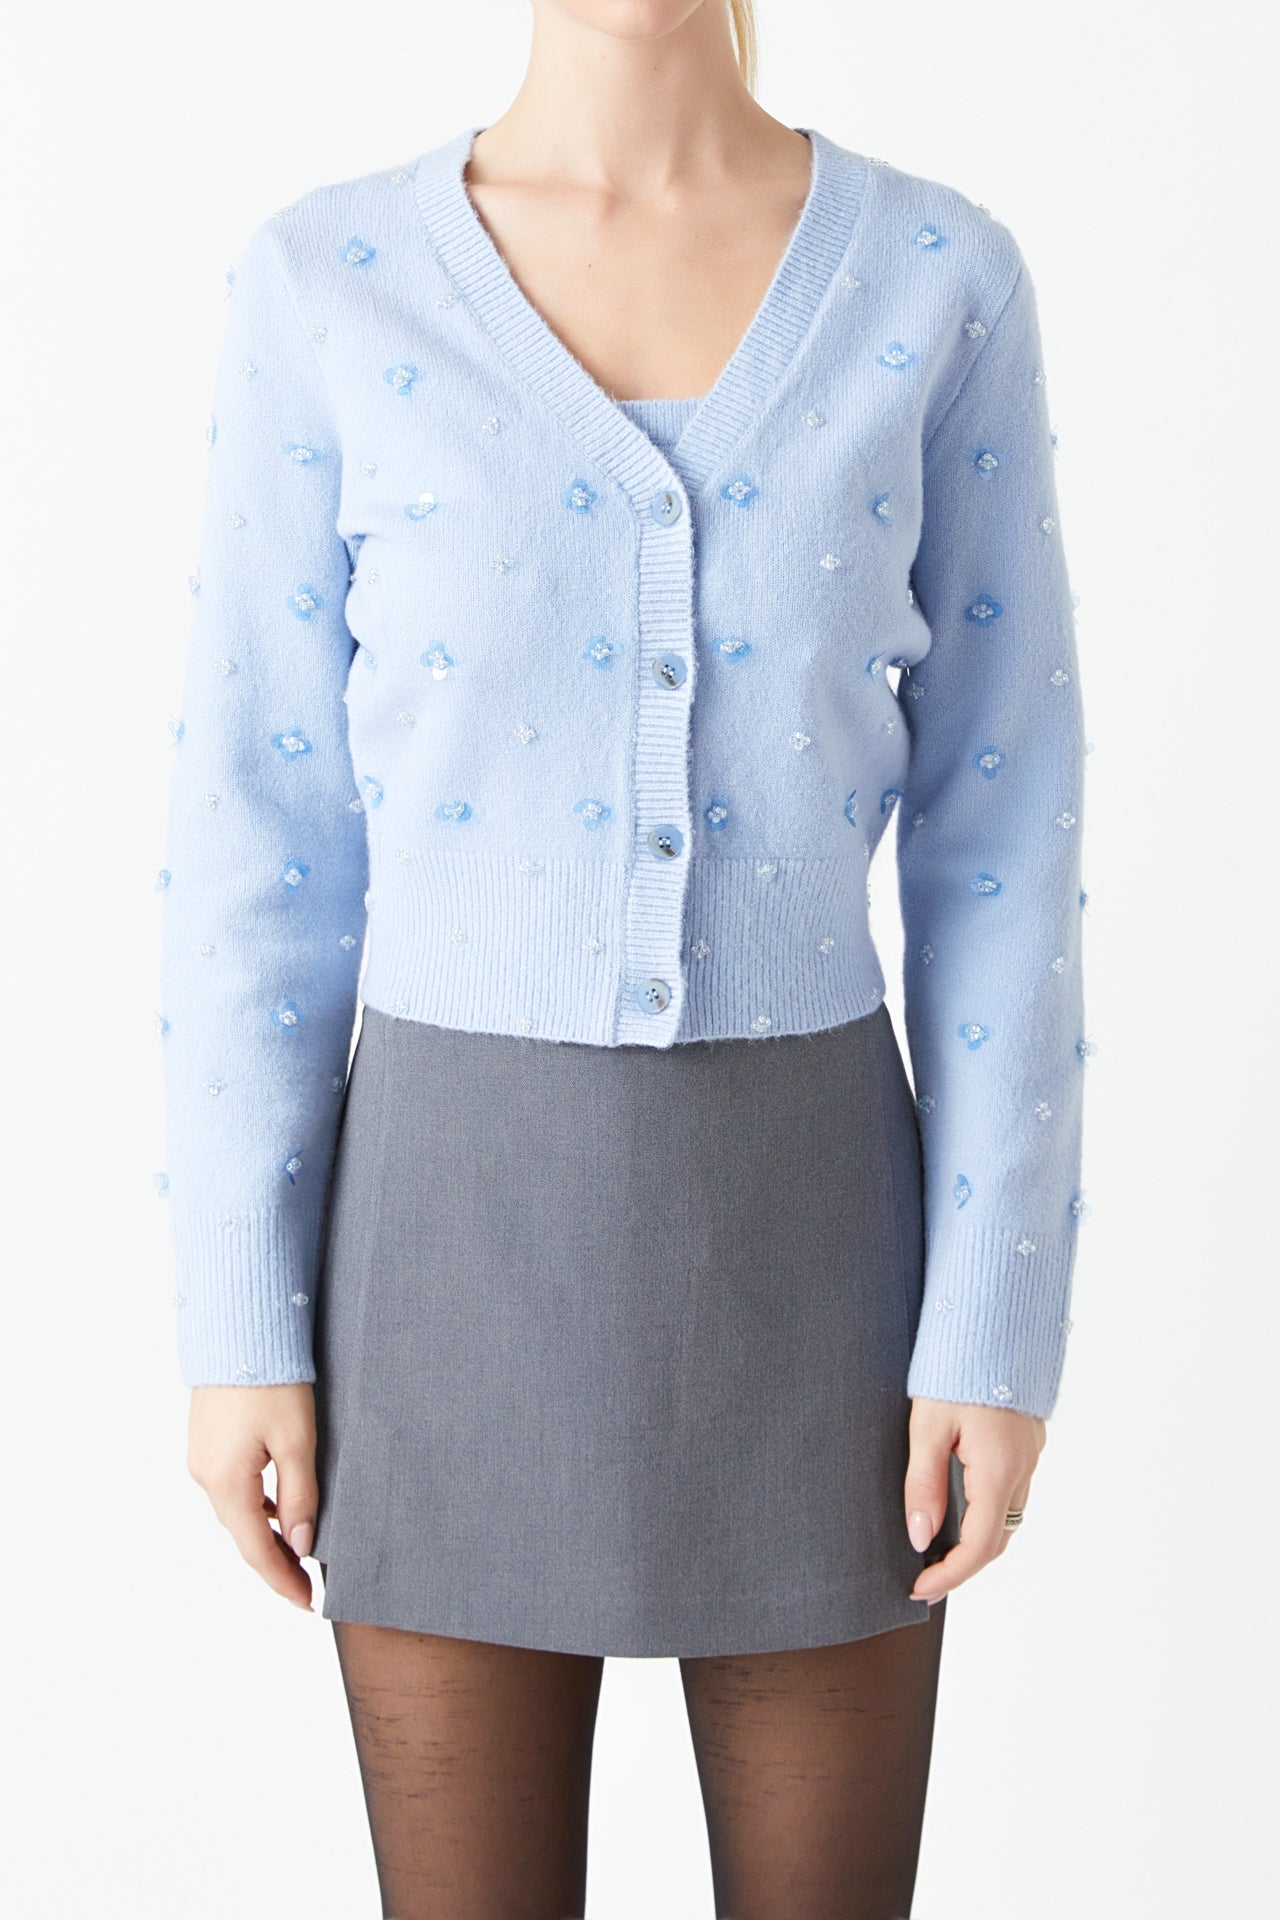 ENDLESS ROSE - Sequin Embellished Cardigan - SWEATERS & KNITS available at Objectrare